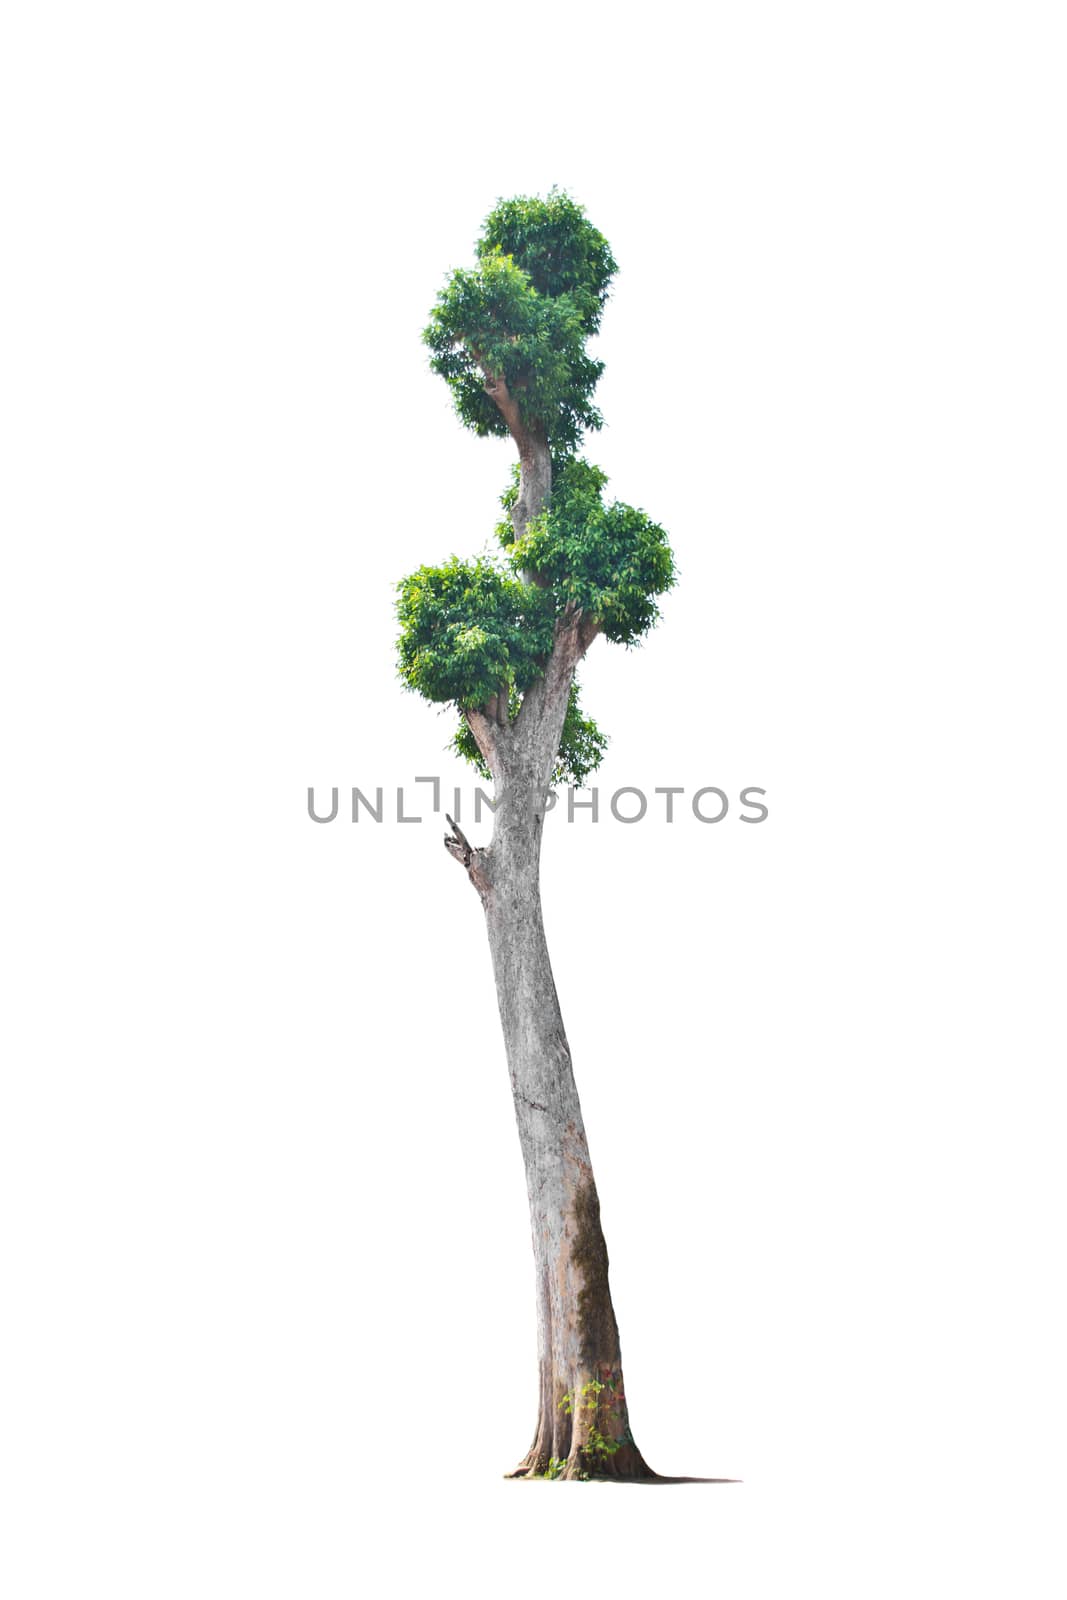 Tree isolate on a white background by Thanamat